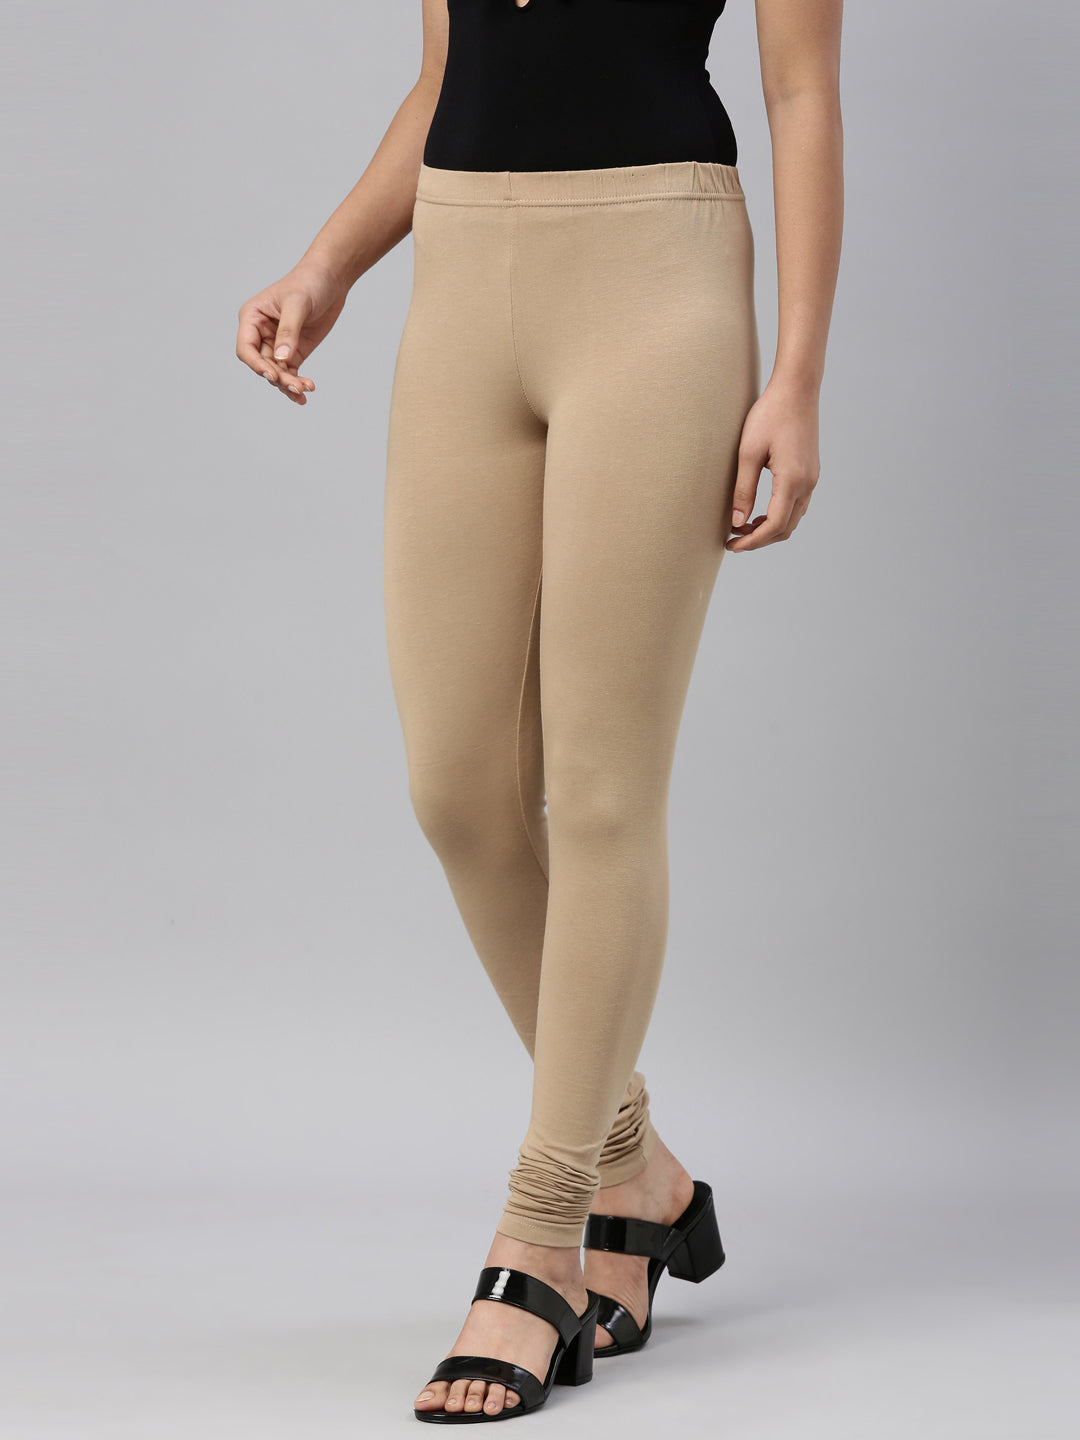 Buy Nityakshi Beige / Cream color Full Ankle Length Churidar Cotton Leggings  Free Size Up to XL 4 Ways Stretchable with Miyani & Elasctic Supports For  Women & Girls Online at Low